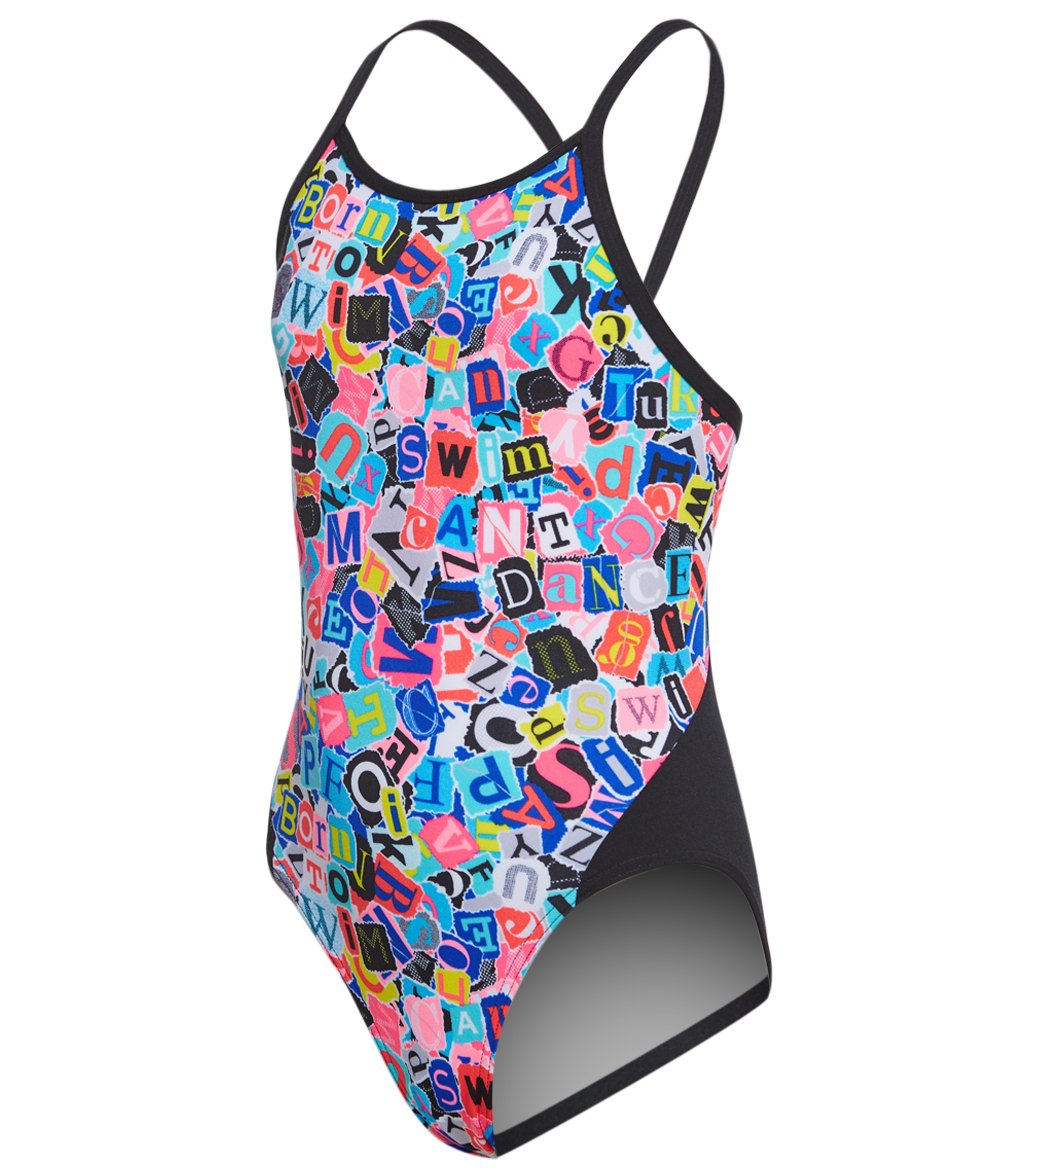 Funkita Girls Handsome Ransom Diamond Back One Piece Swimsuit At Free Shipping